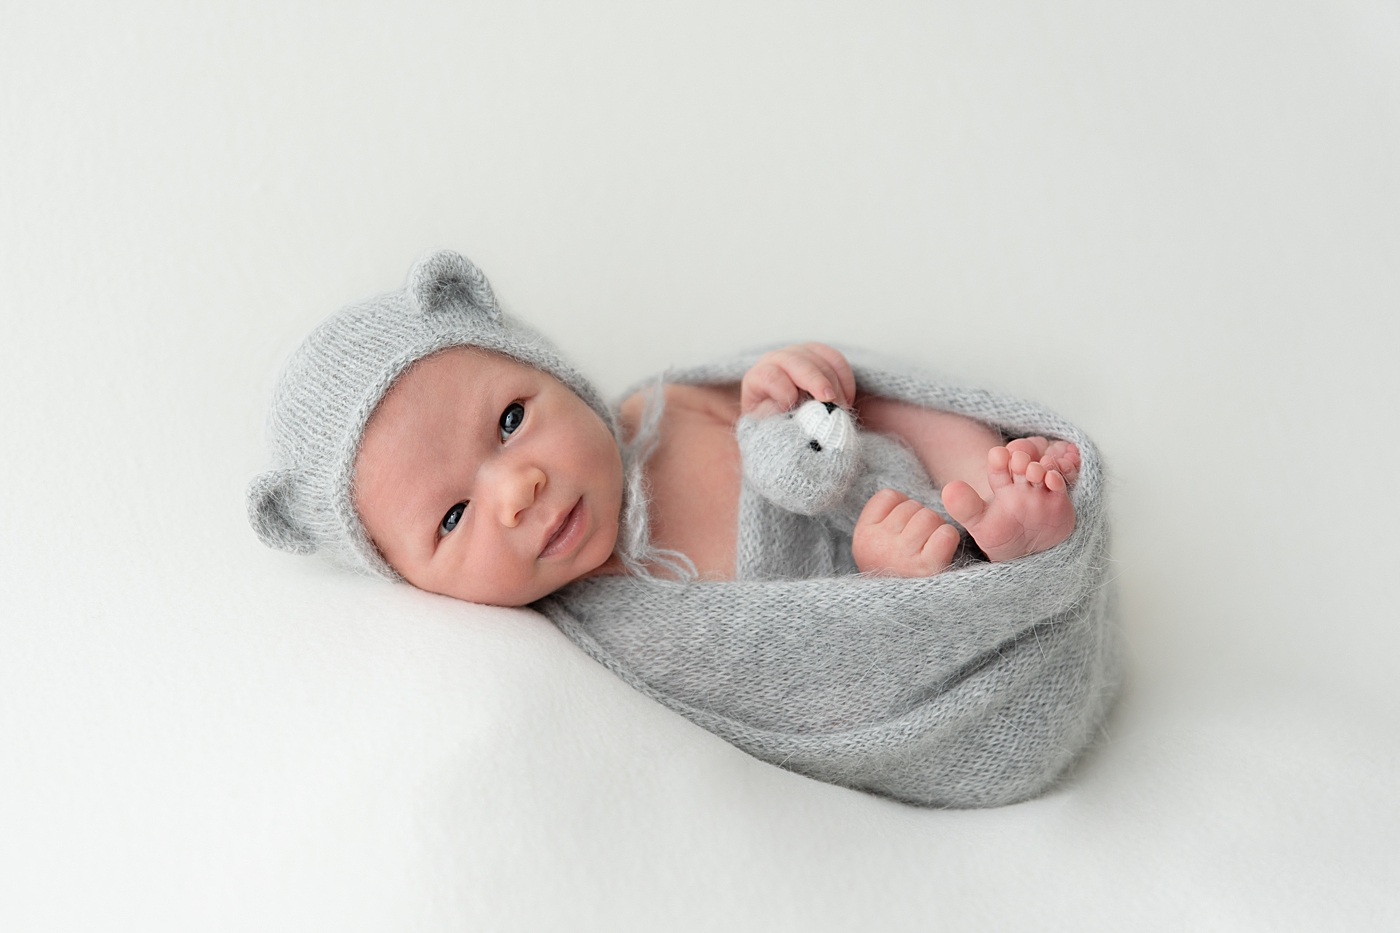 Baby boy in grey knit swaddle and hat for newborn photos. Photo by Rachel Brookes Photography.